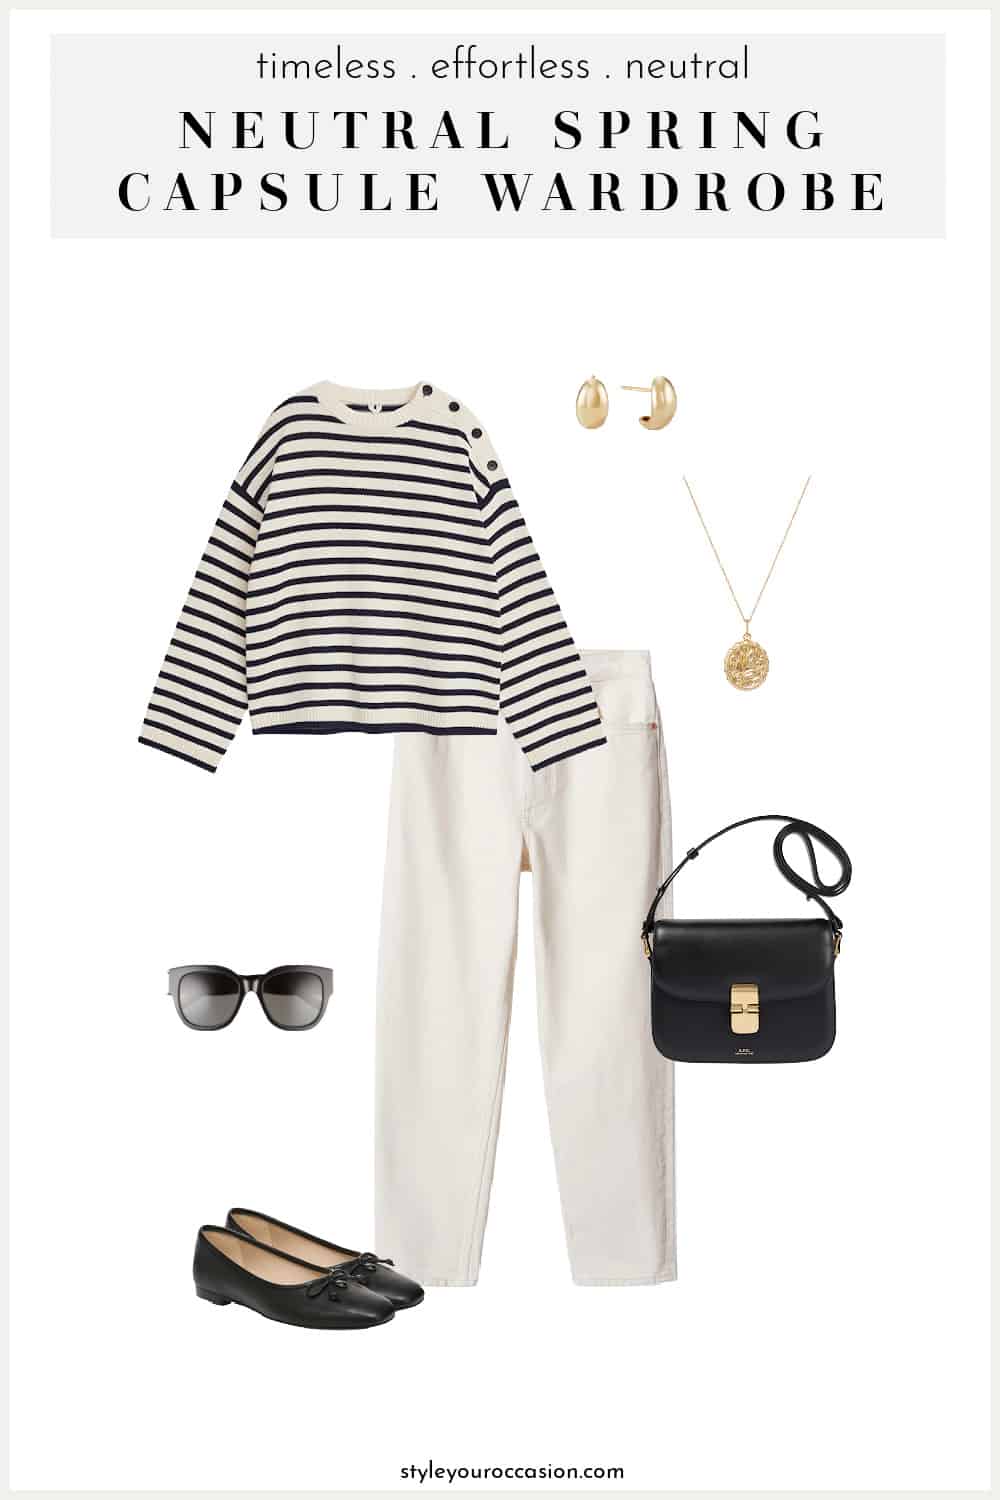 outfit image with a striped knit sweater, off-white jeans, black ballet flats and a black leather bag